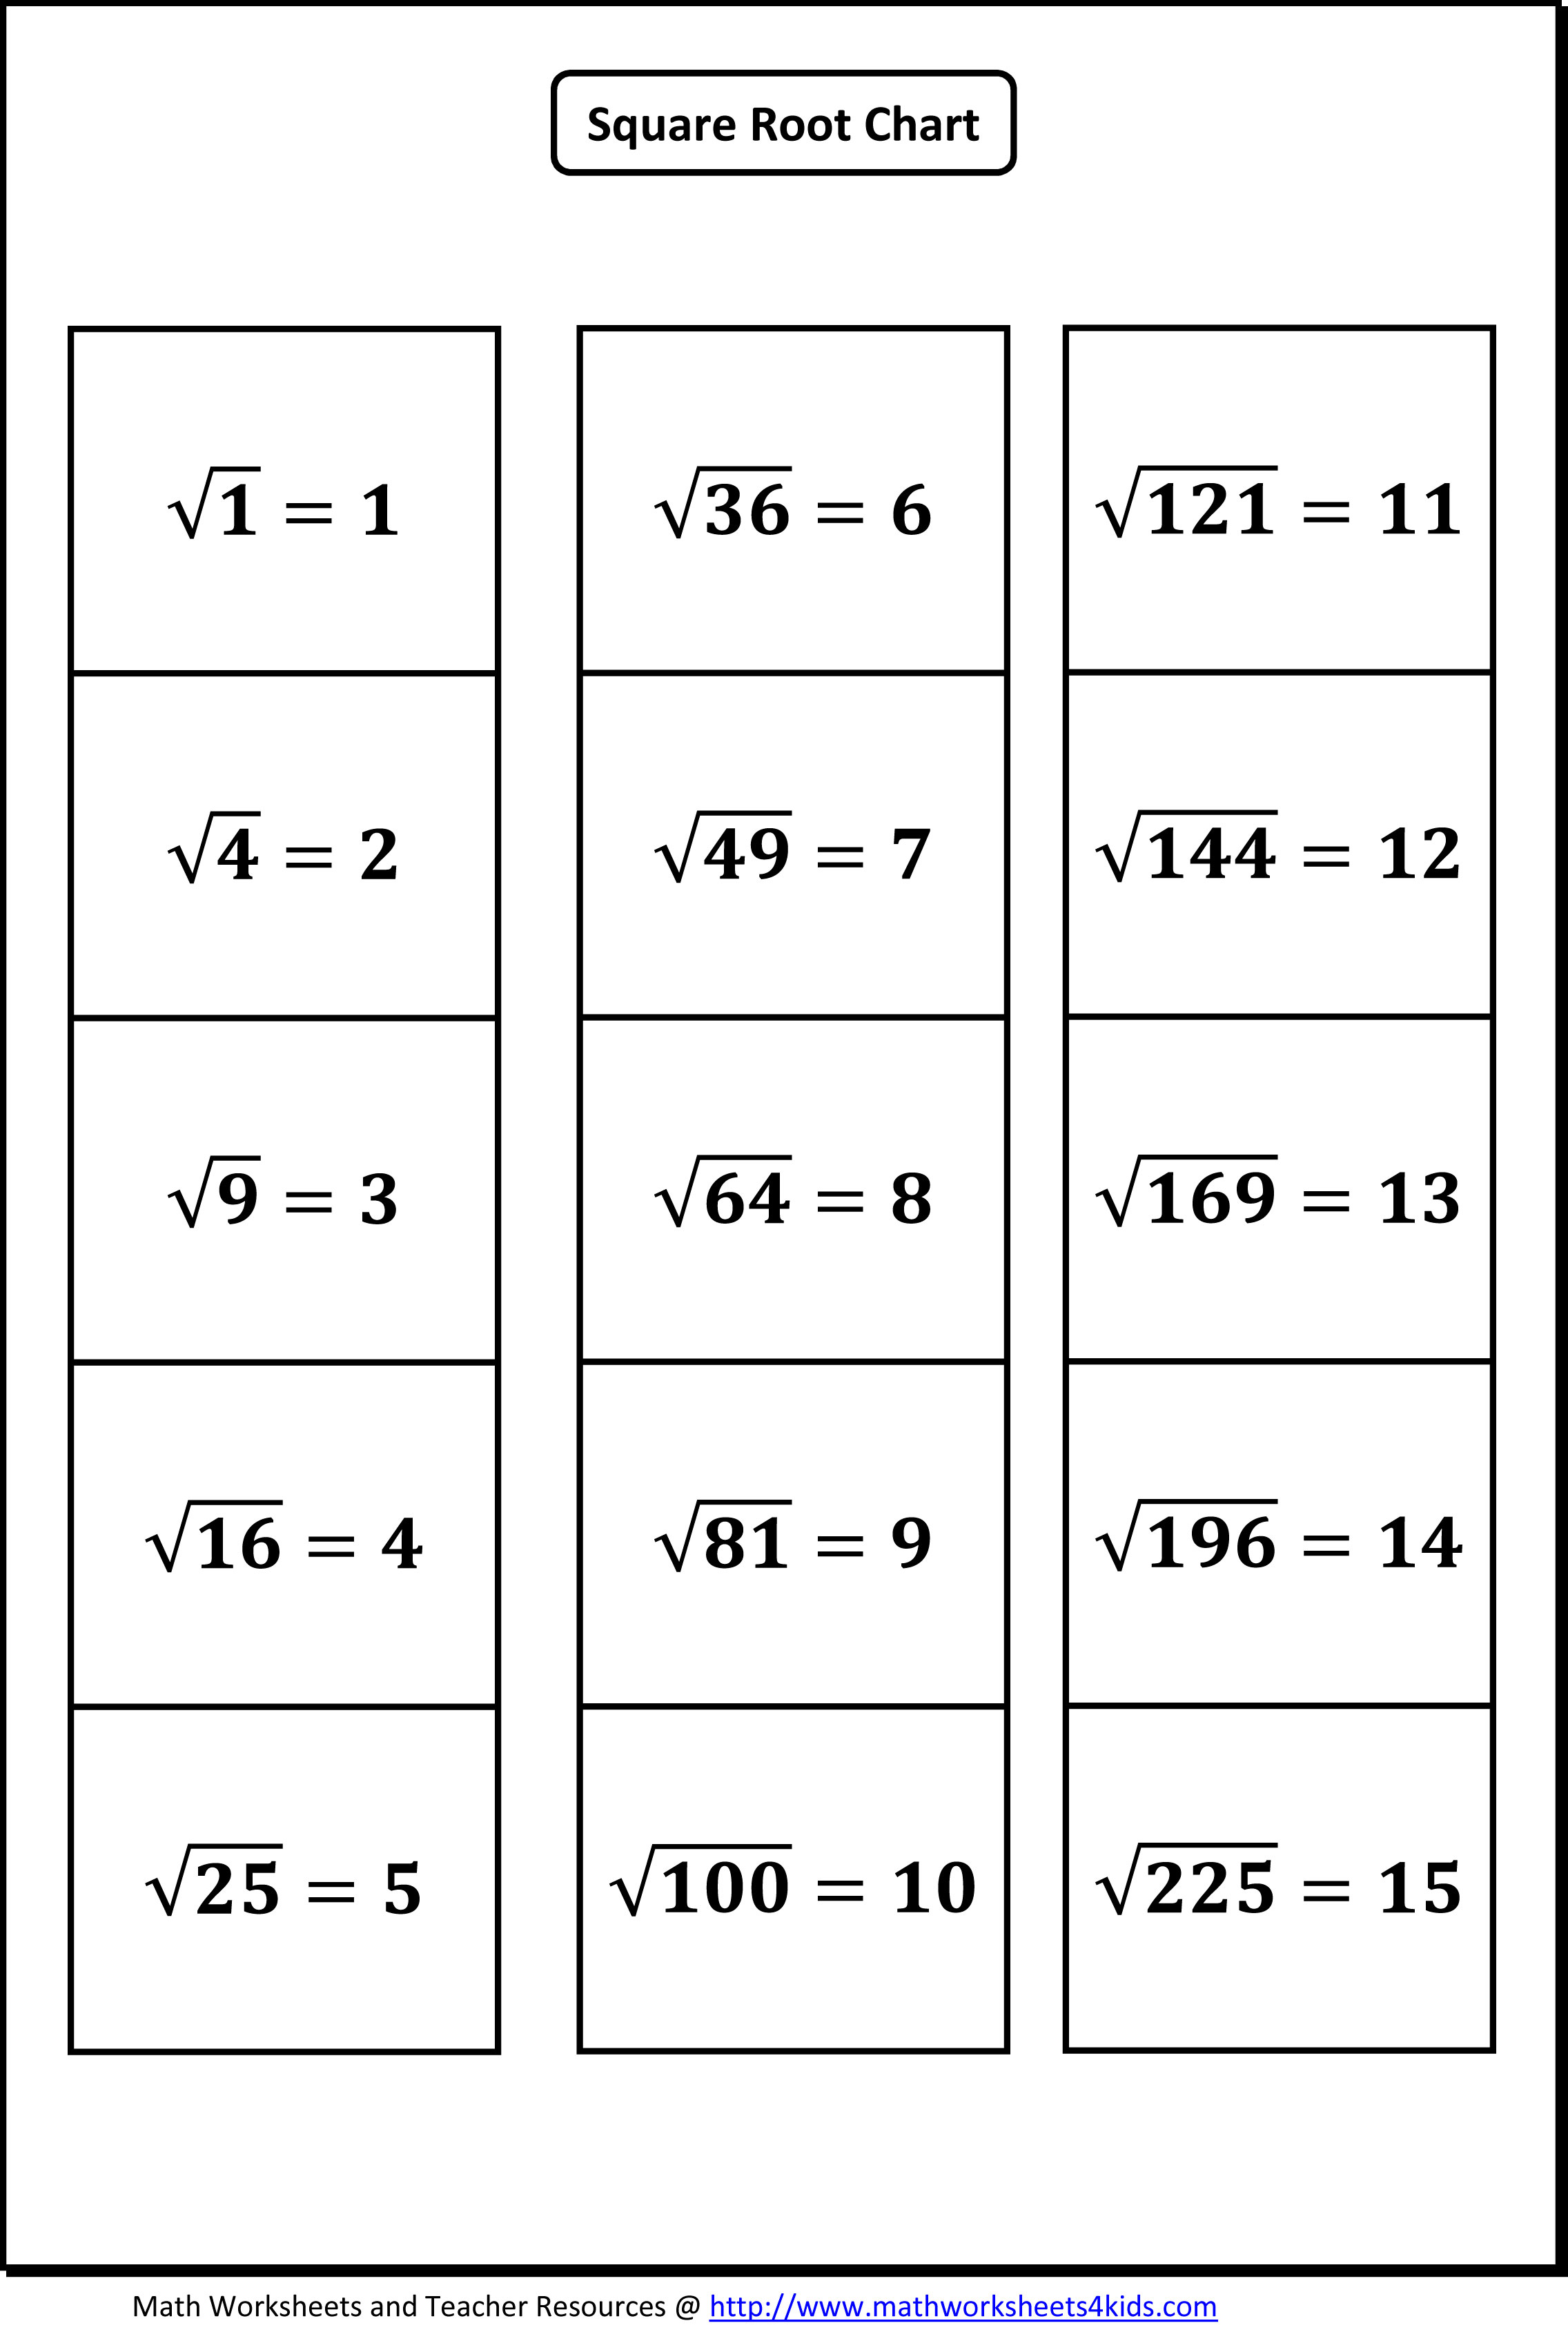 Square Root Worksheets 8th Grade Pdf